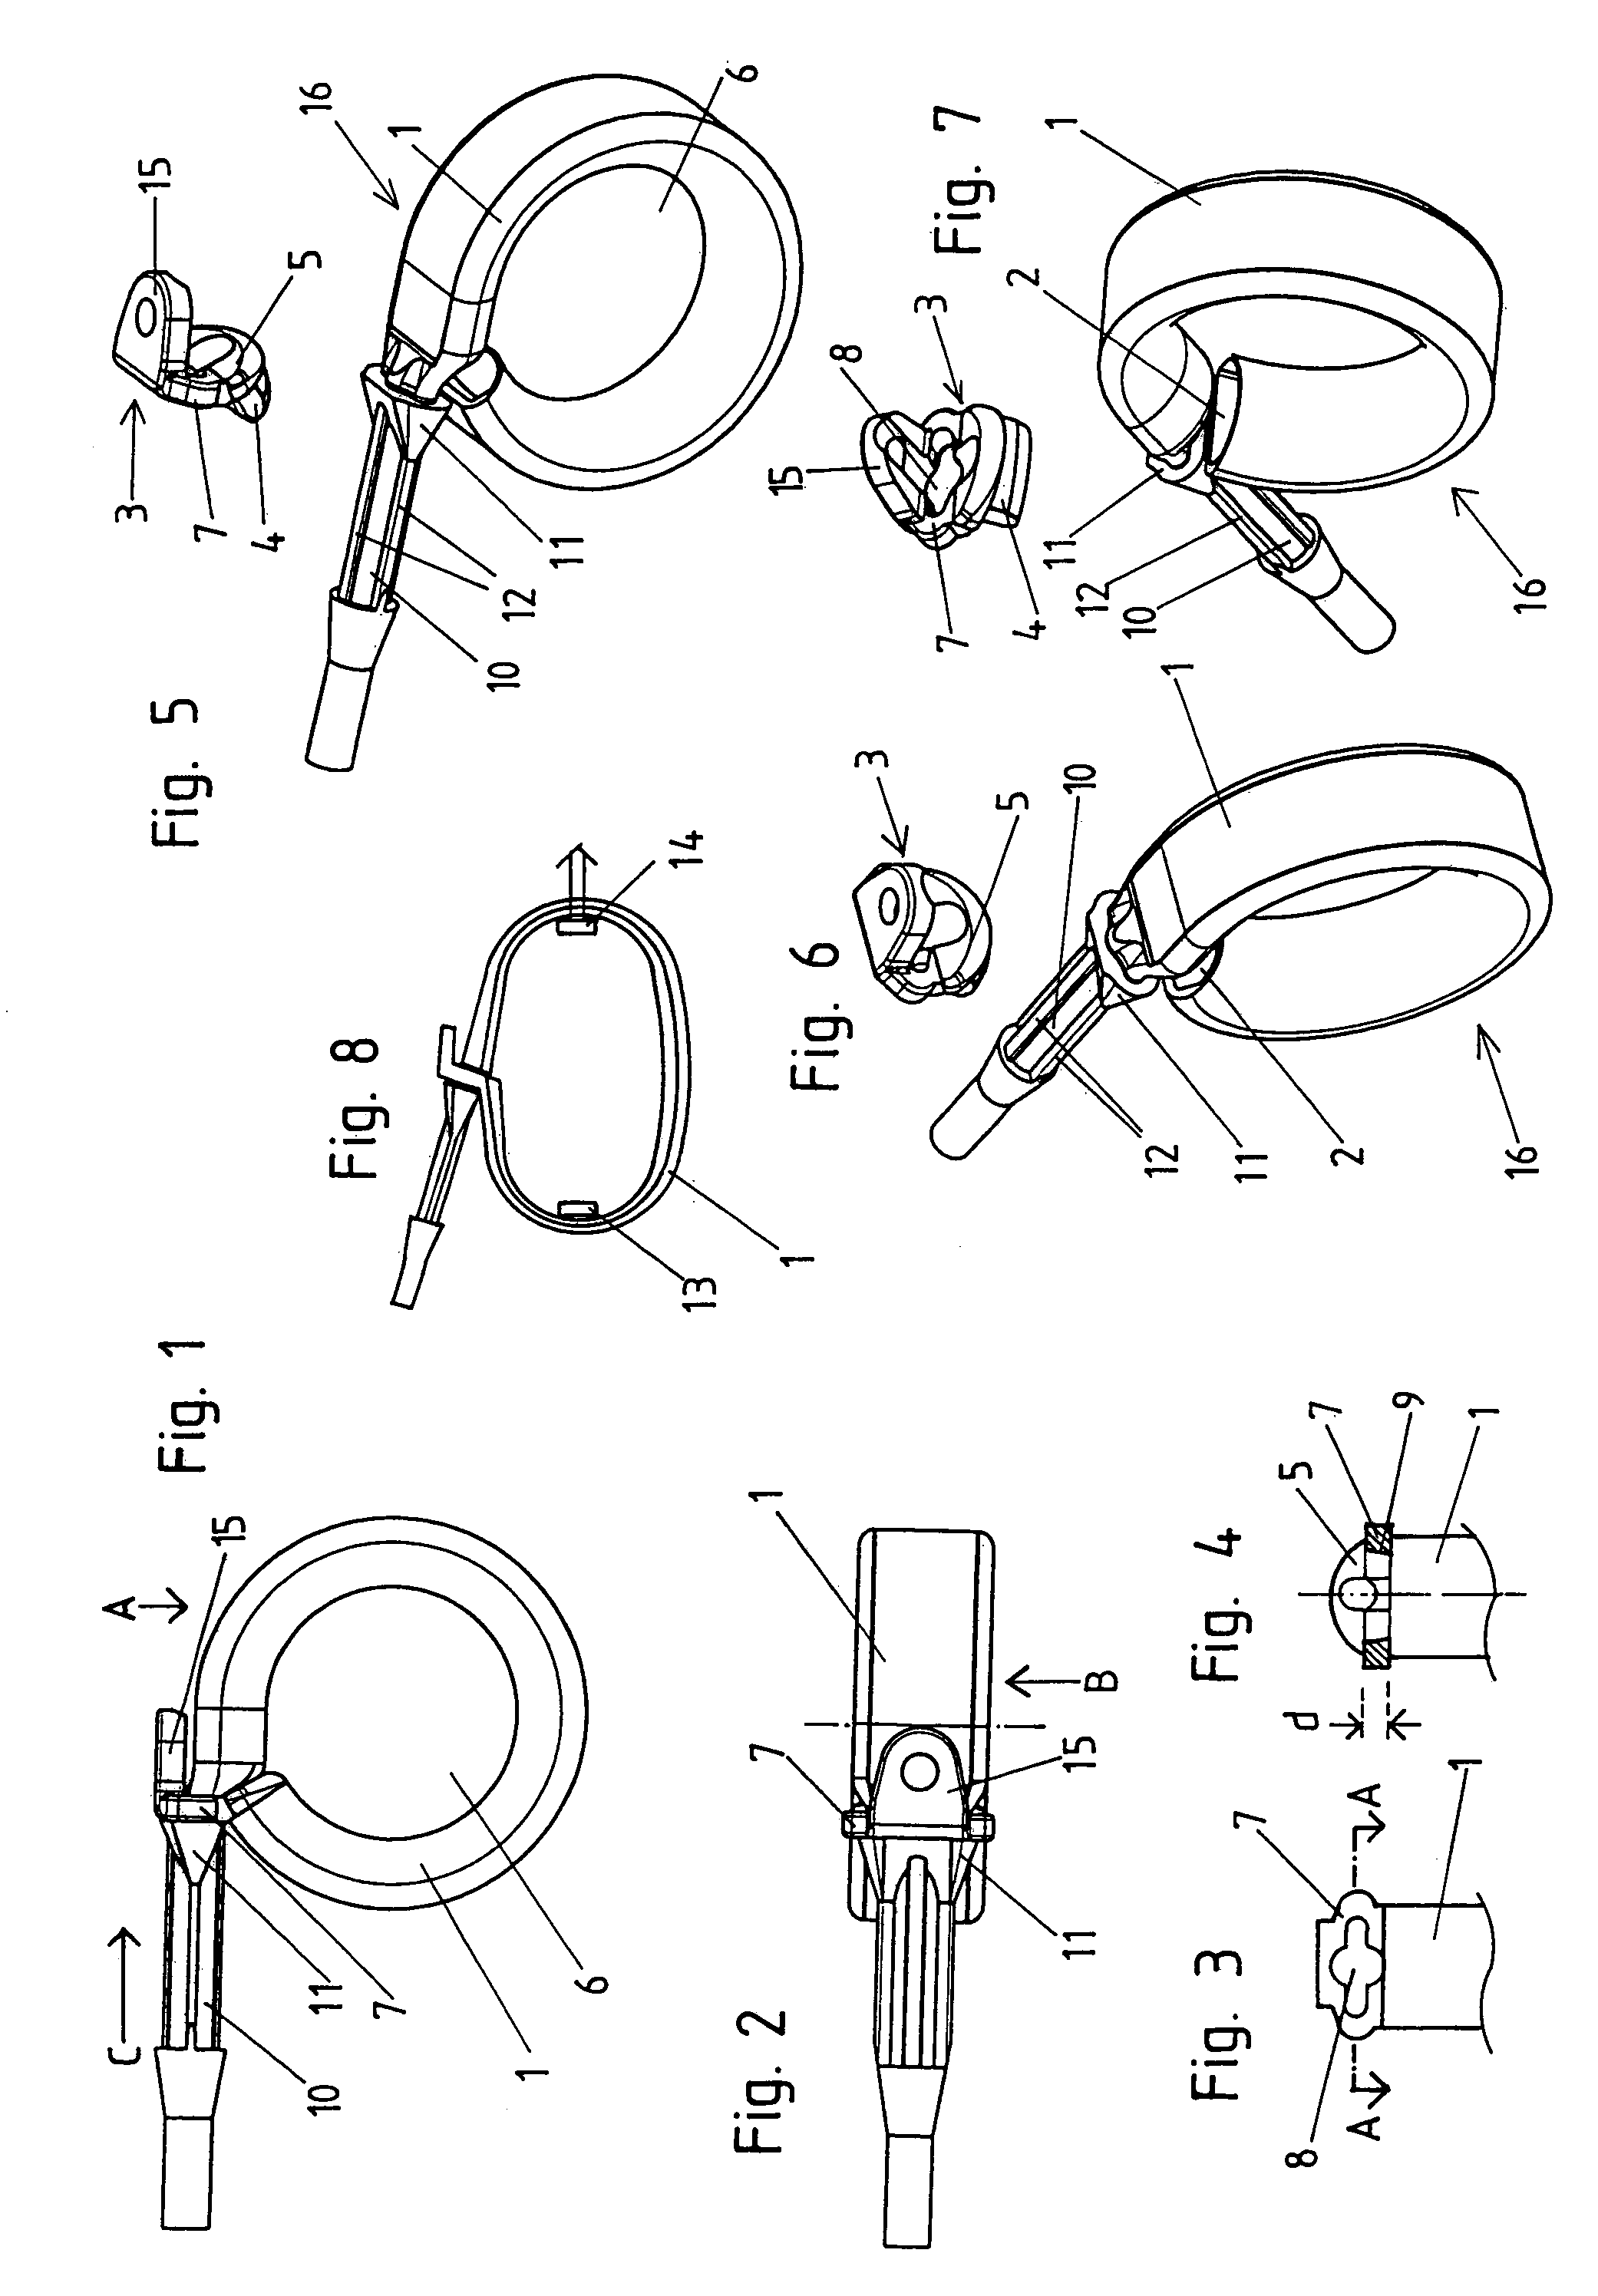 Device for generating an artificial constriction in the gastrointestinal tract